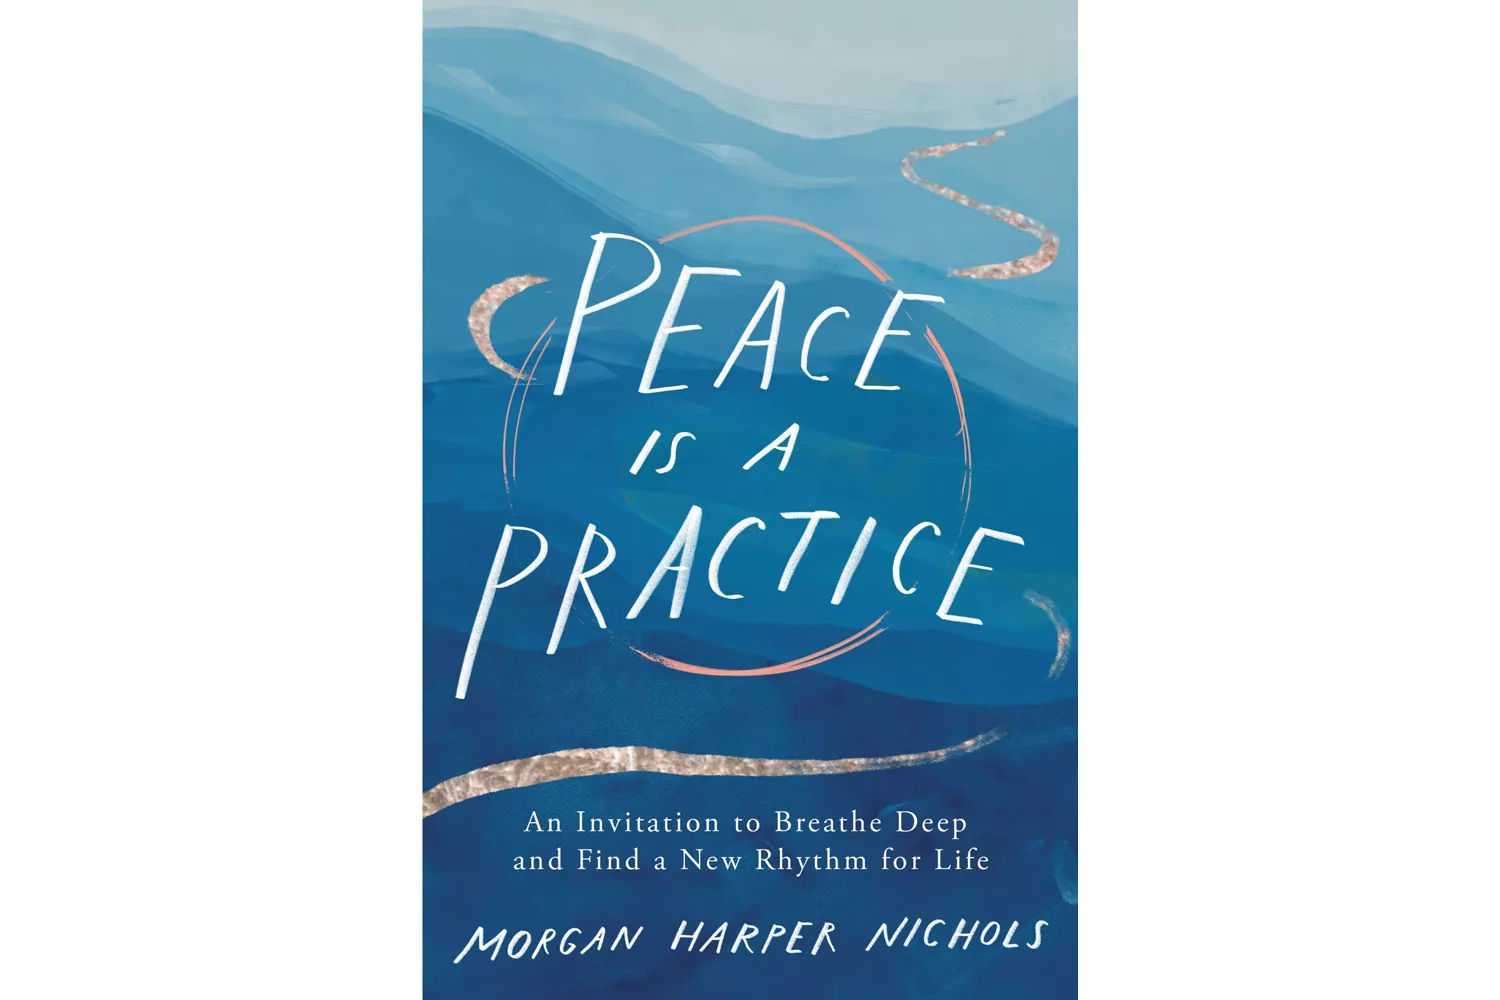 Peace Is a Practice: An Invitation To Breathe Deep and Find a New Rhythm for Life